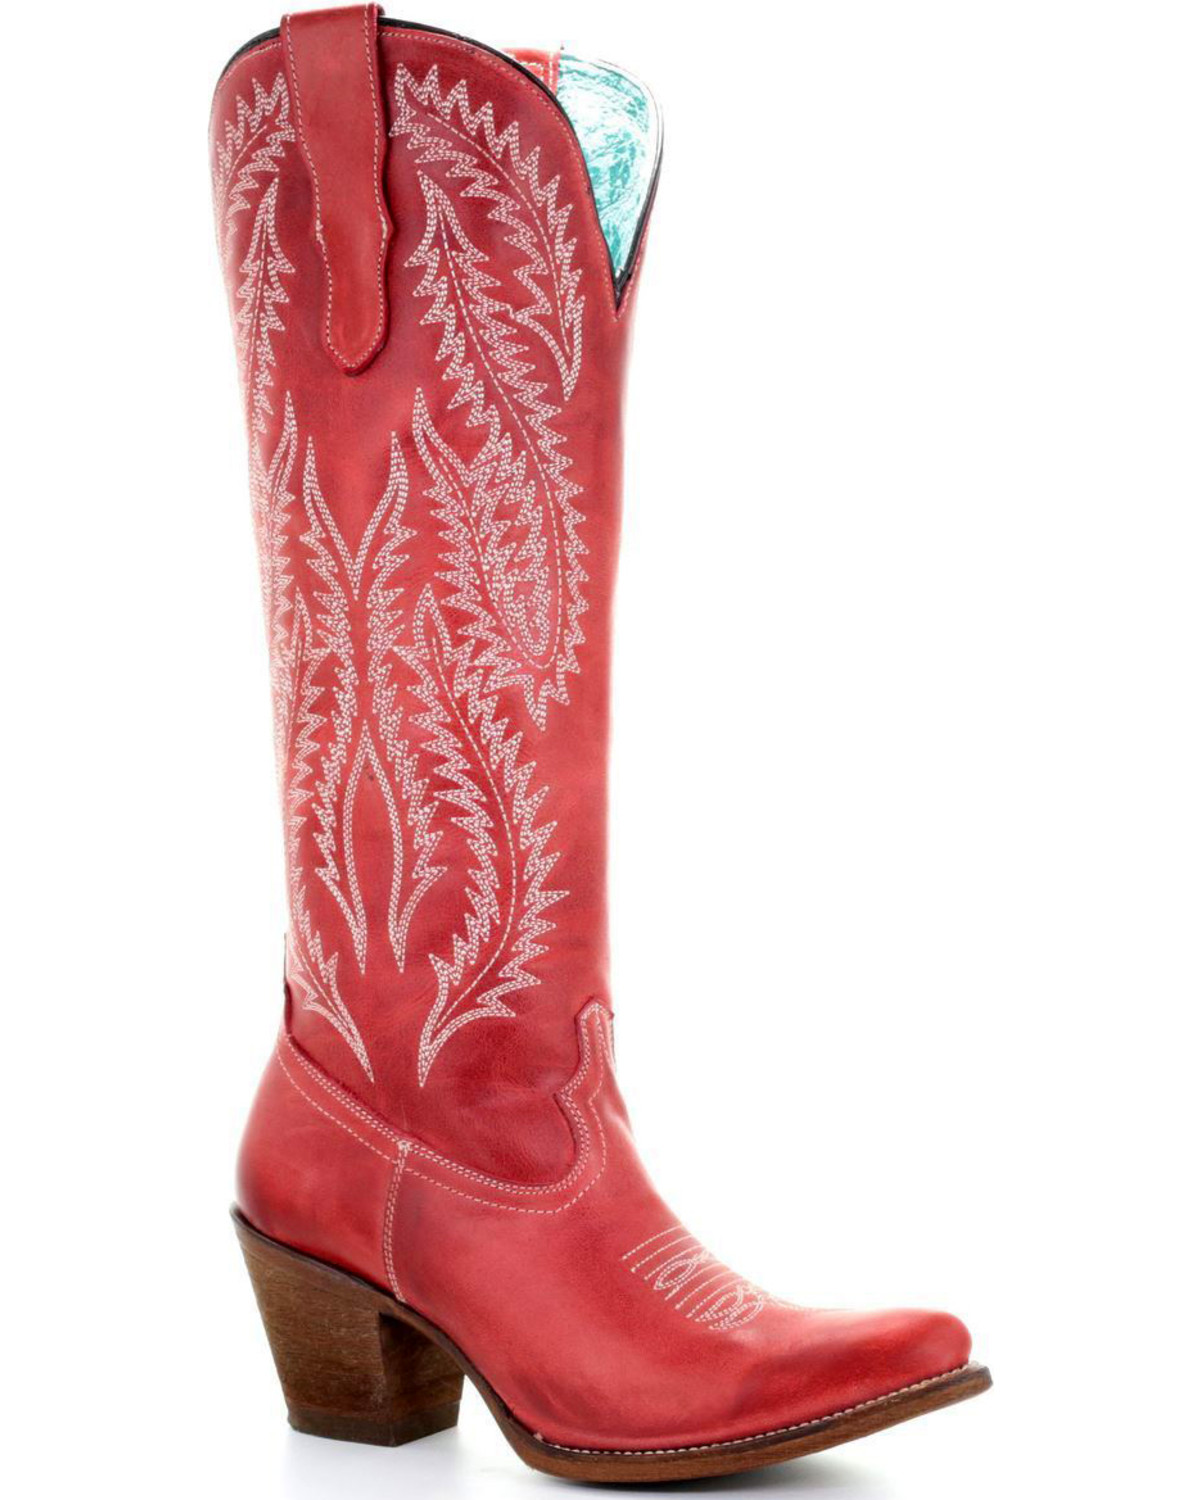 Corral Women's Red Embroidery Tall Top Western Boots - Round Toe